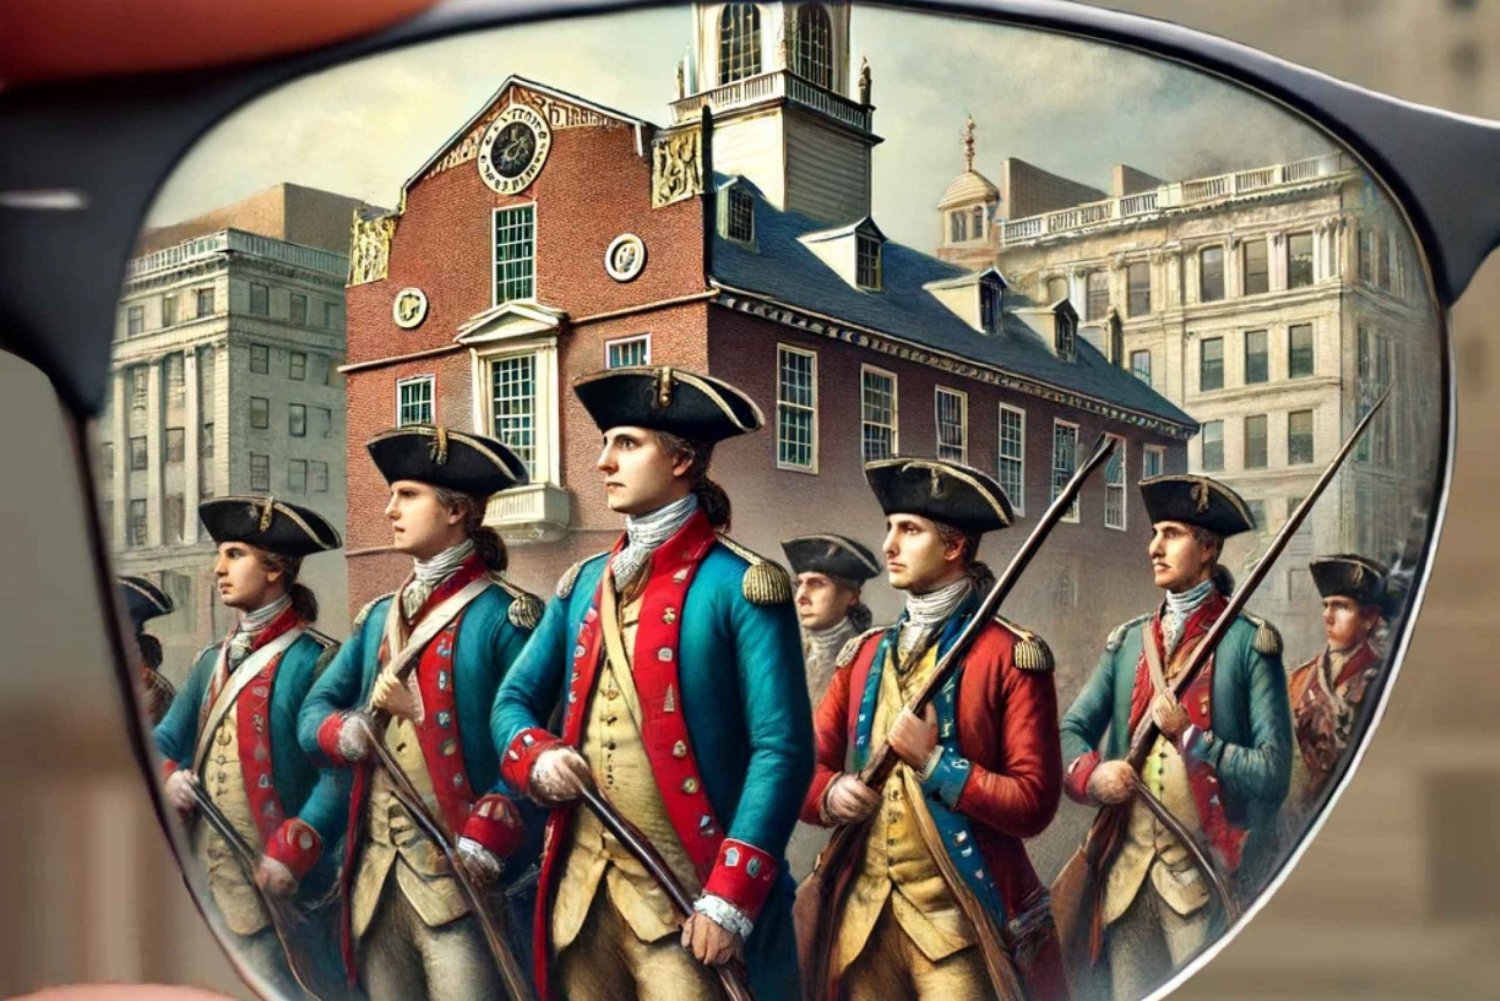 Relive 1770: Interactive AR Experience on The Freedom Trail